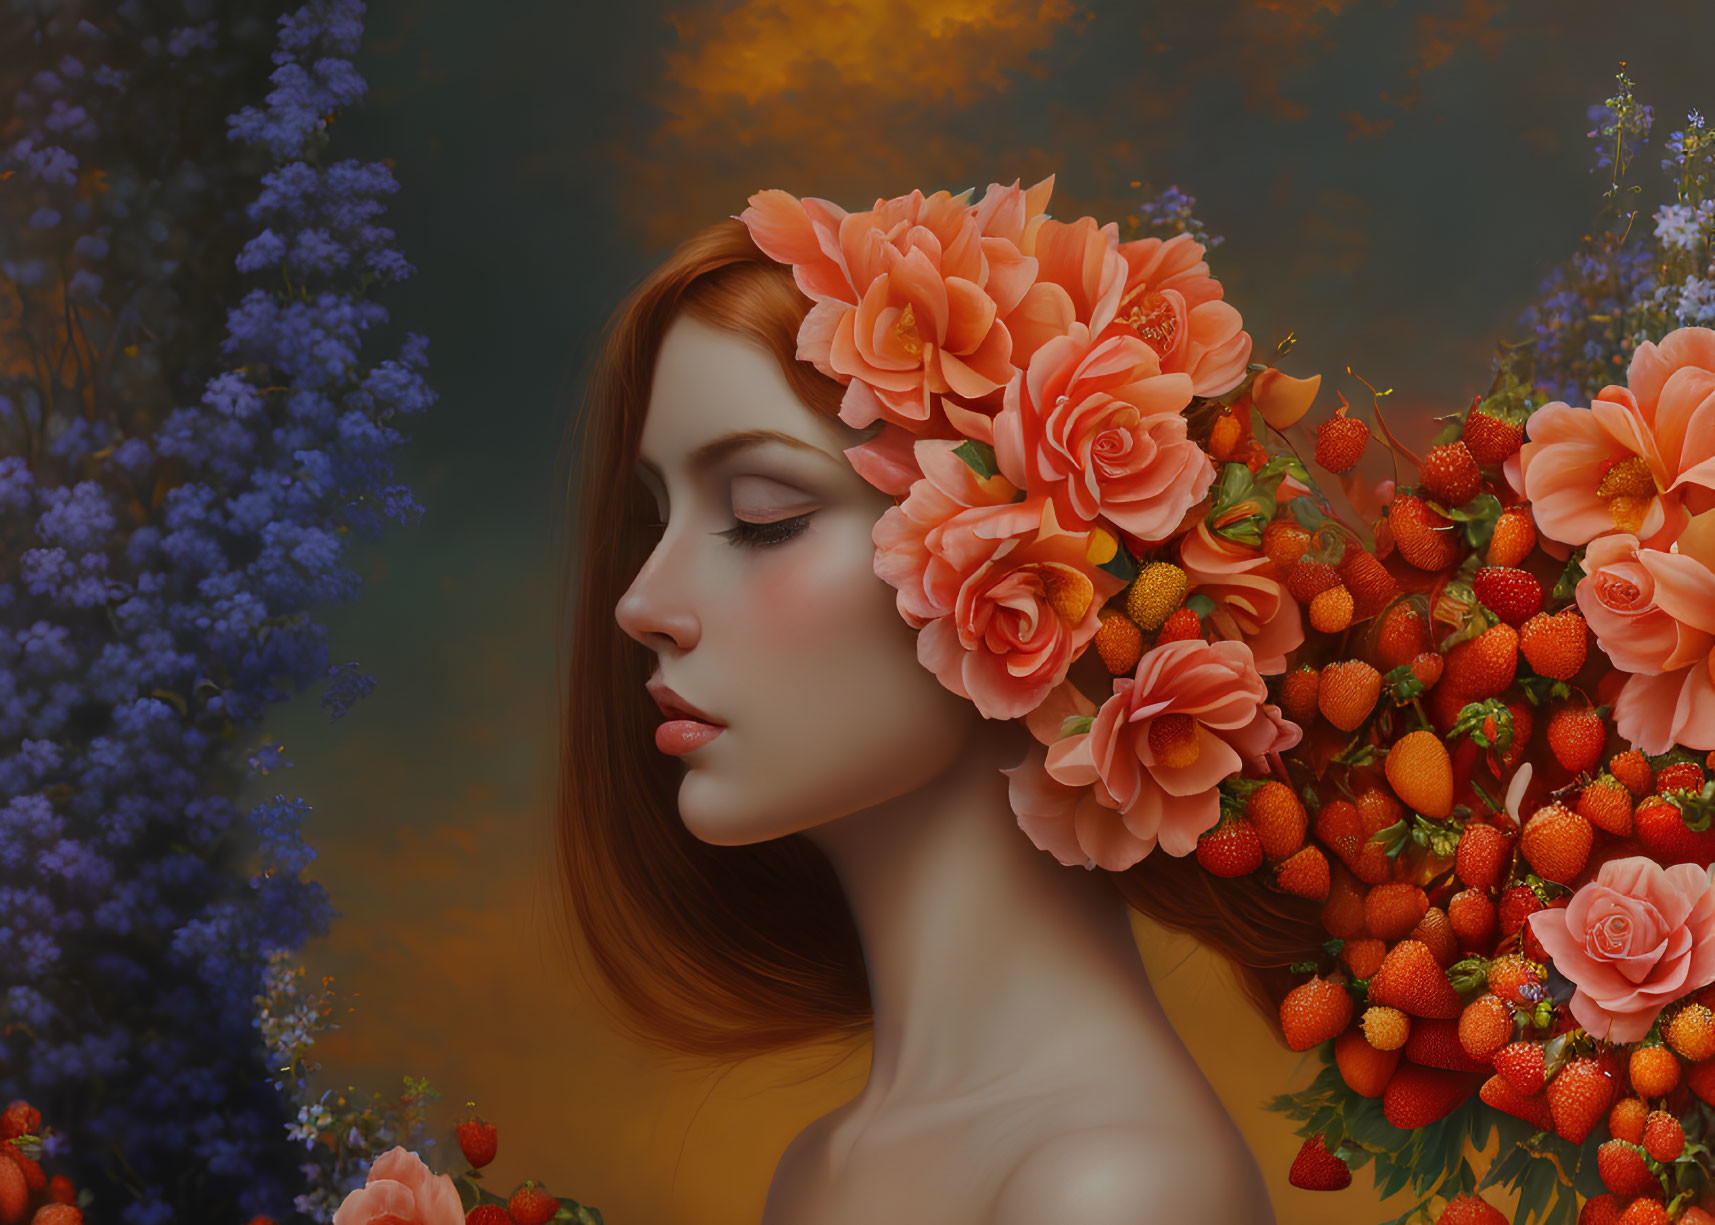 Woman with Orange Flower Wreath and Strawberries in Hair Illustration